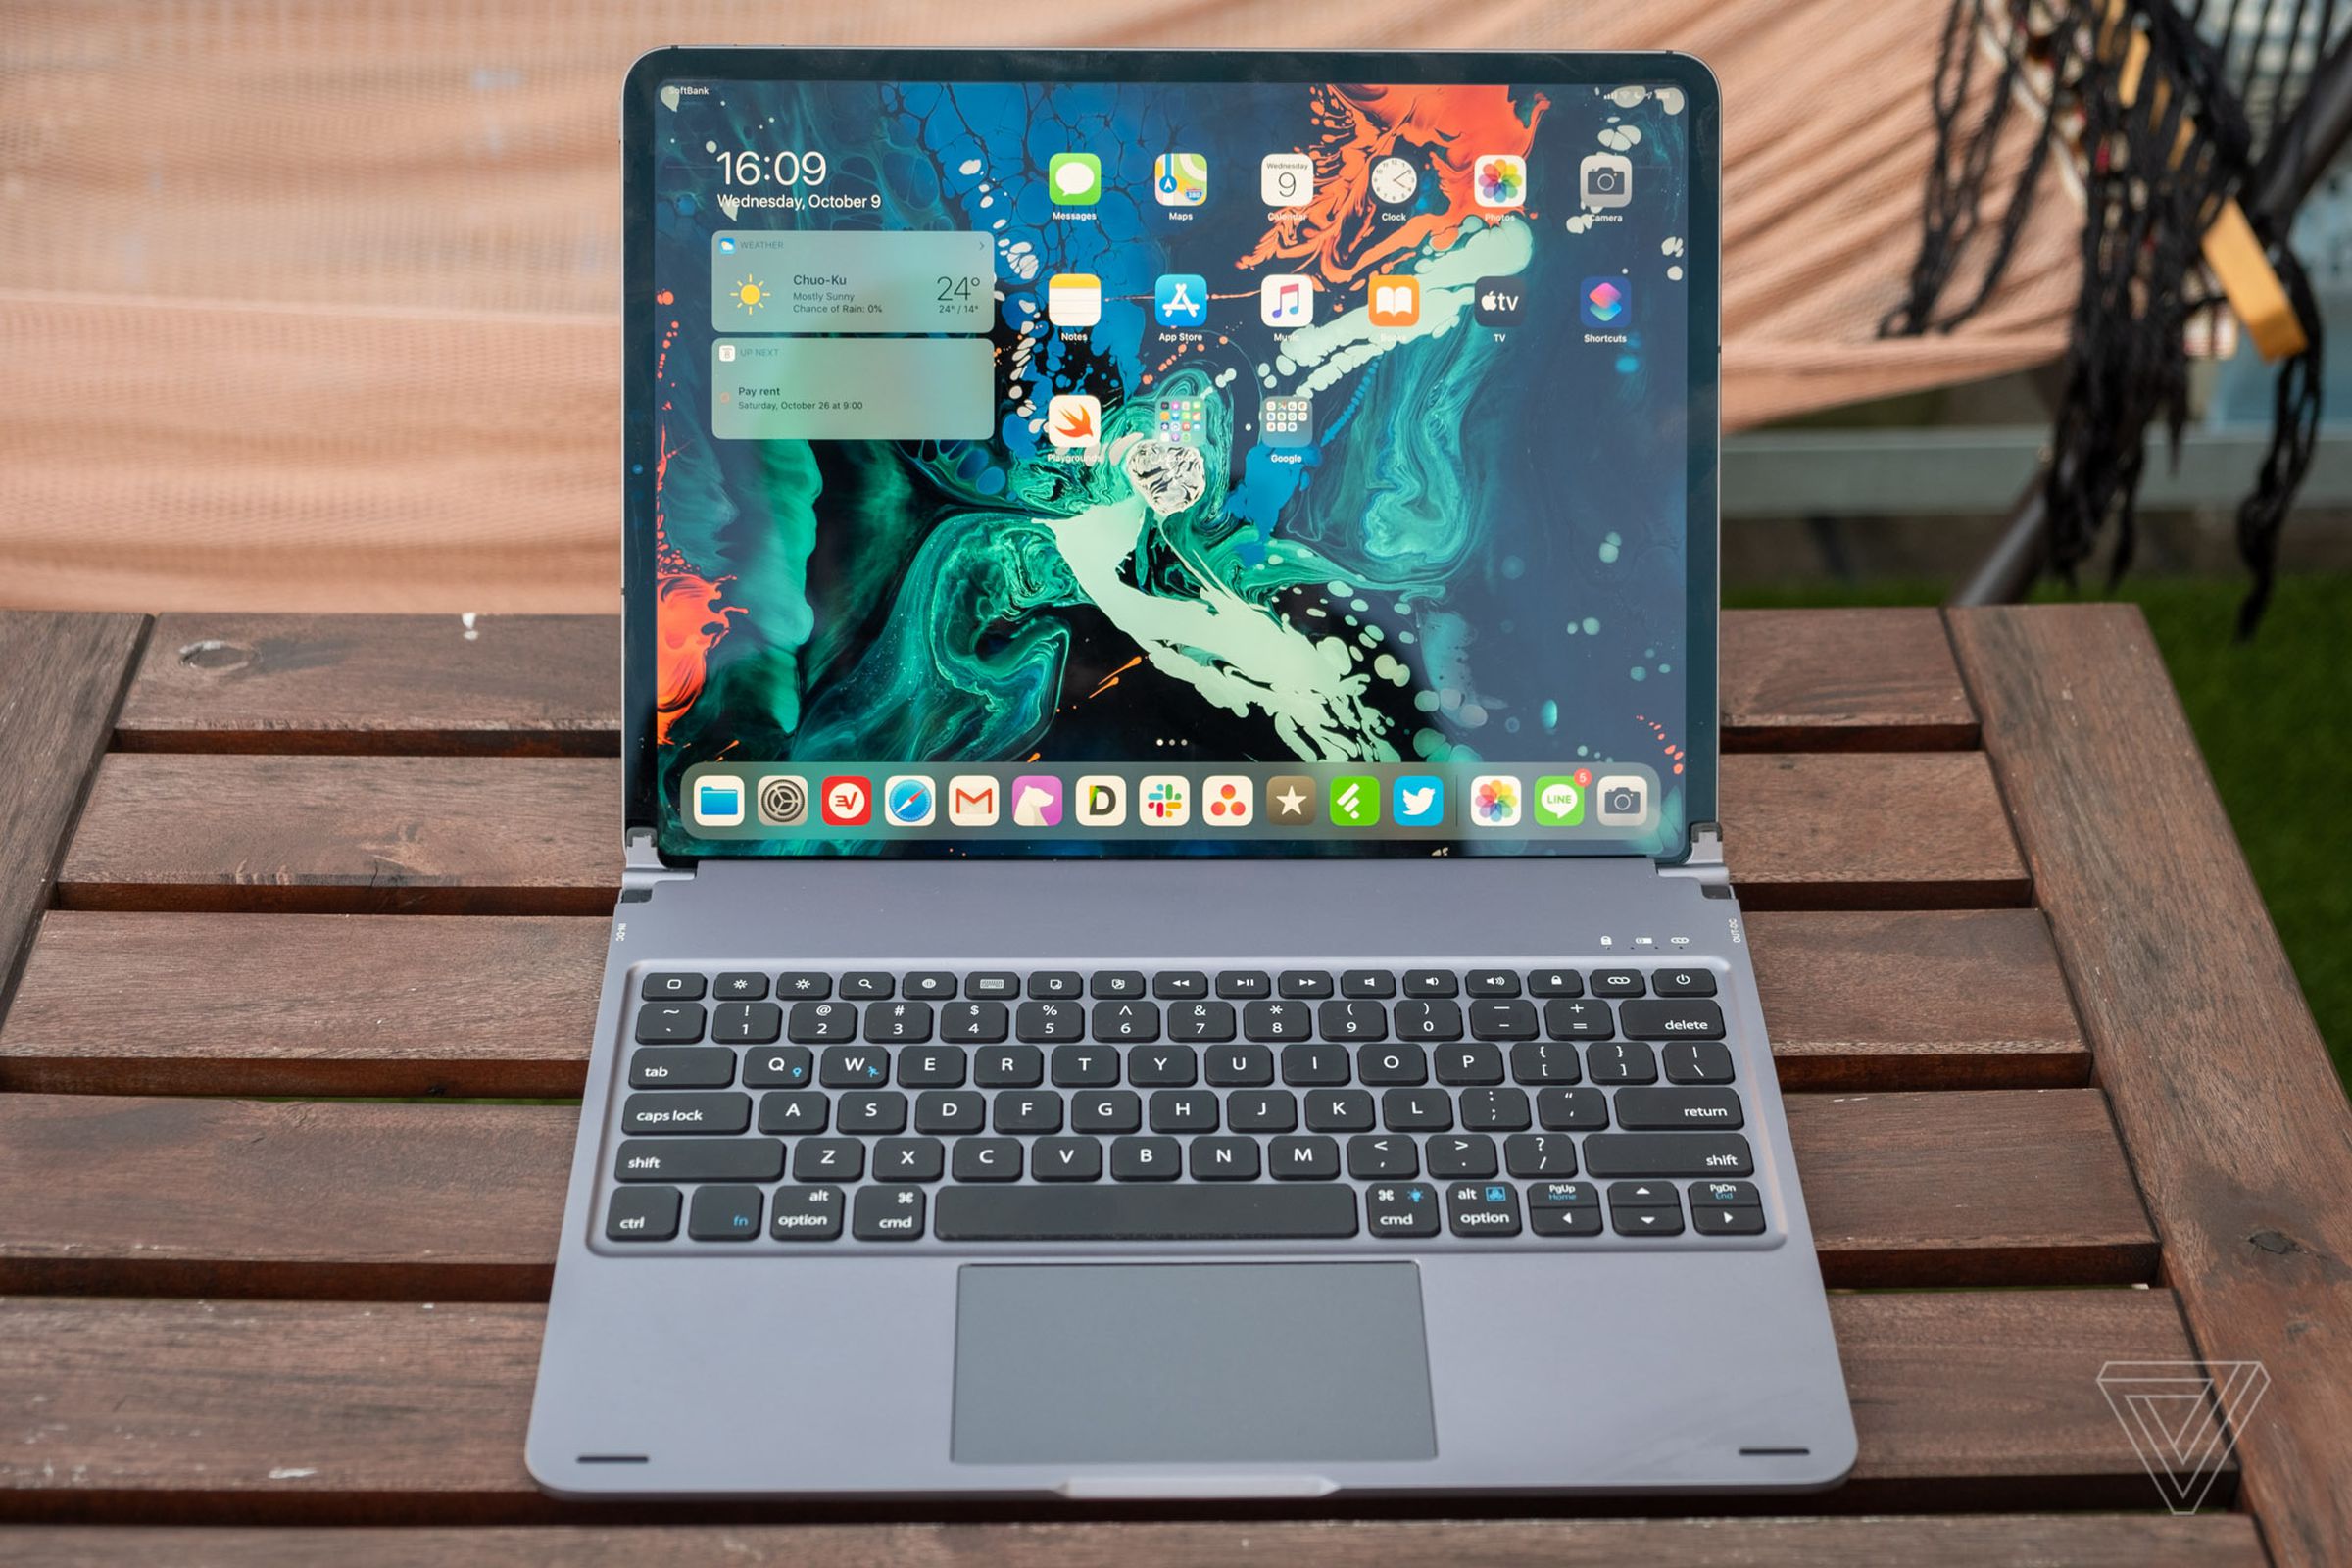 The Libra keyboard attached to an iPad Pro.